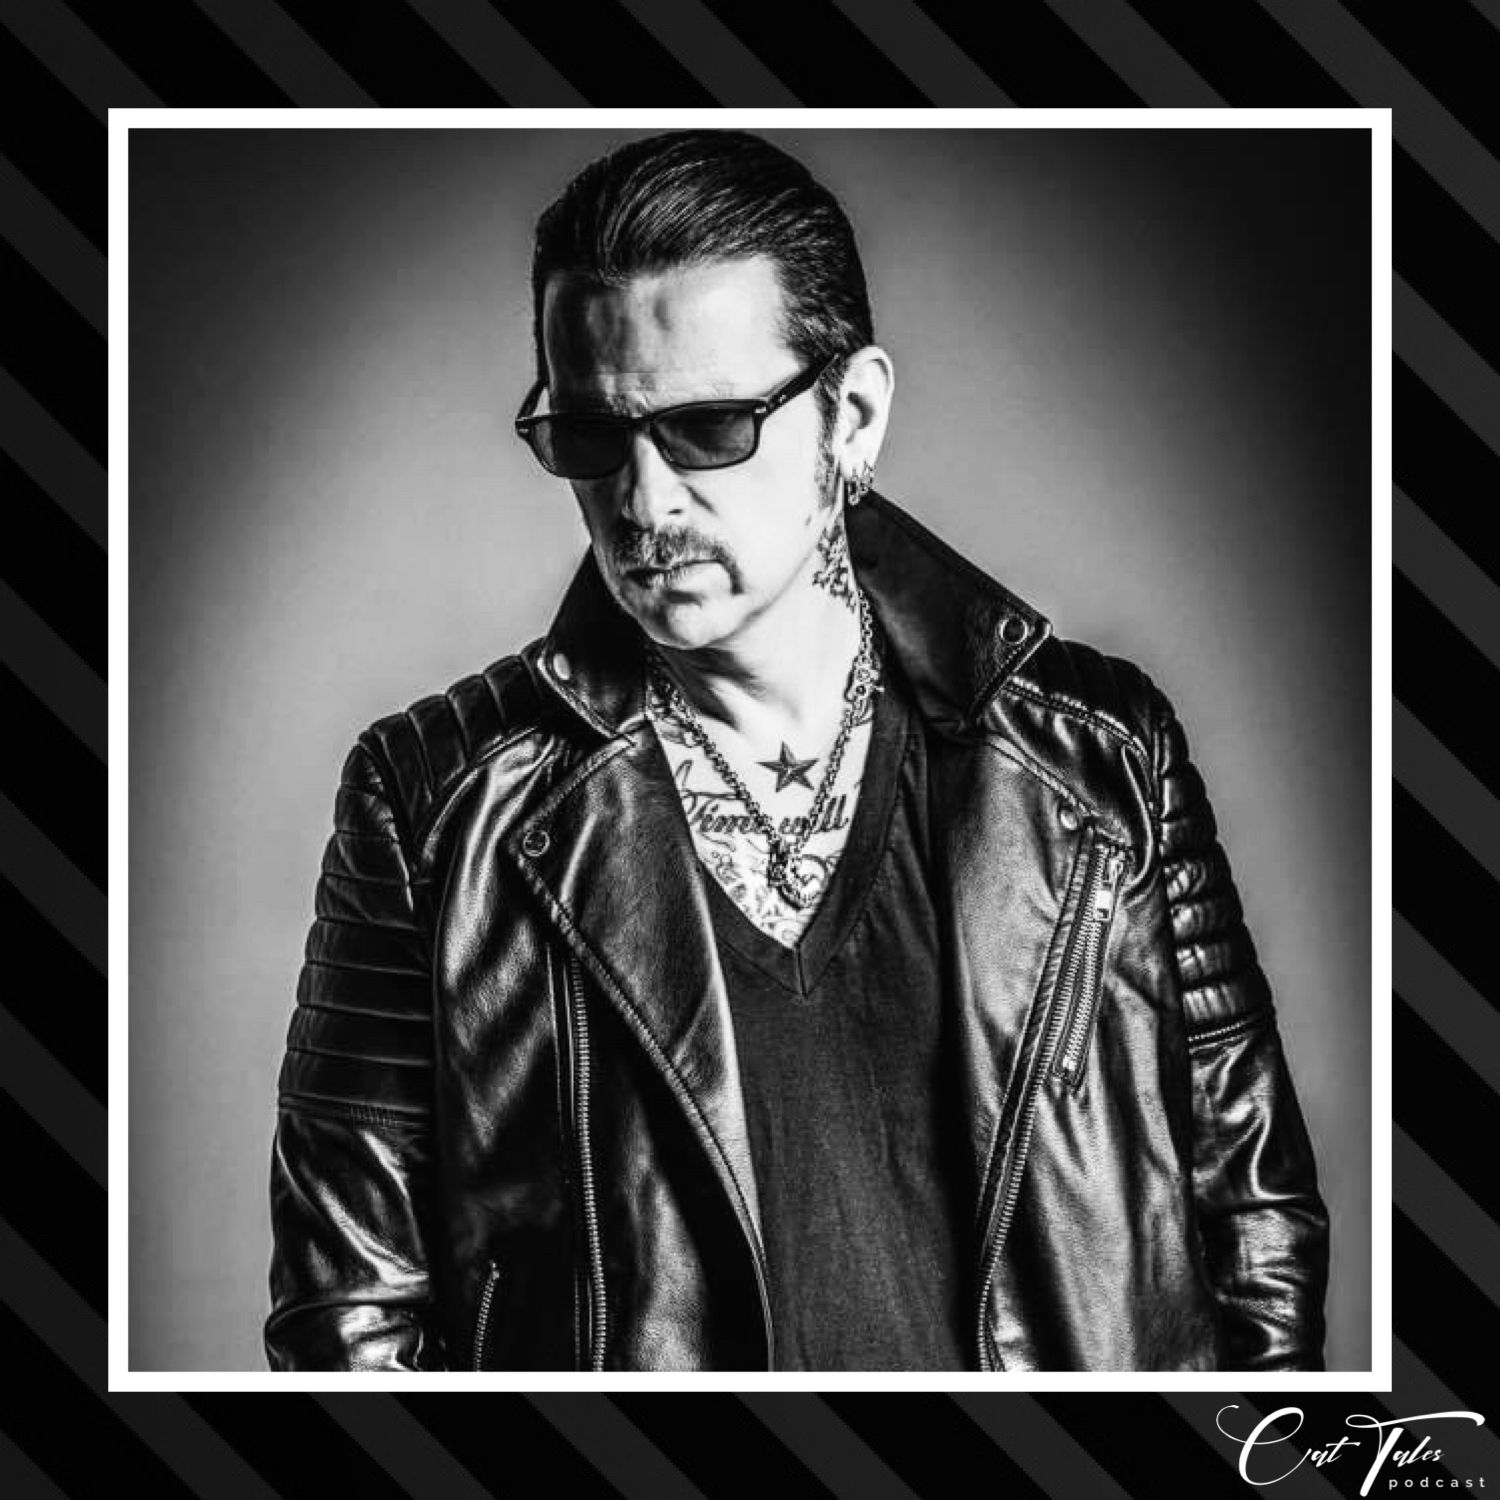 94: The other one with Ricky Warwick